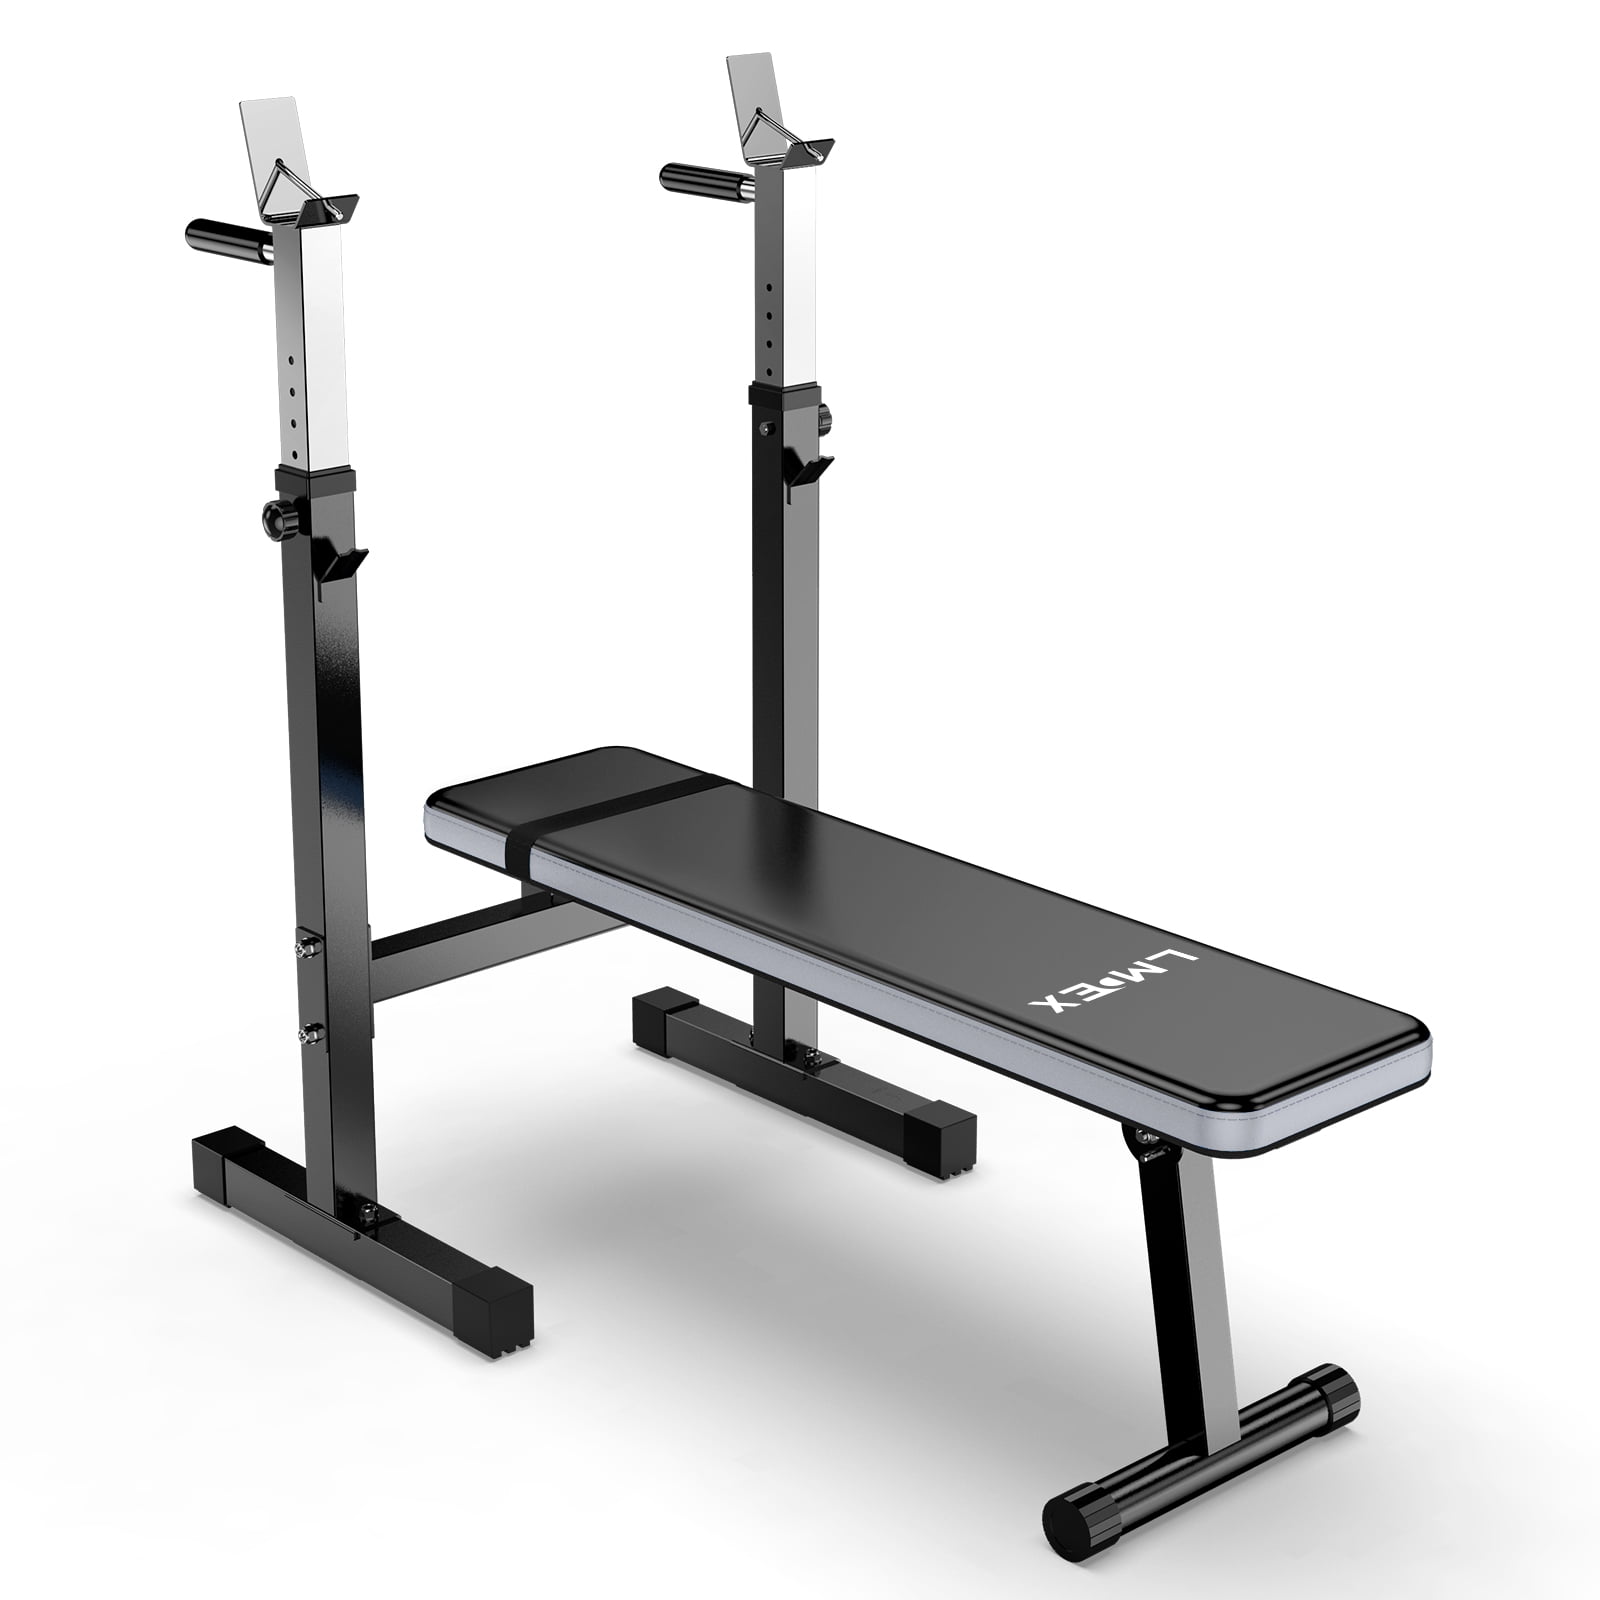 Bench Weight Folding Strength Capability Rack Fitness Barbell Body Full Decline Workout Adjustable Gym for & Incline Home LMDEX